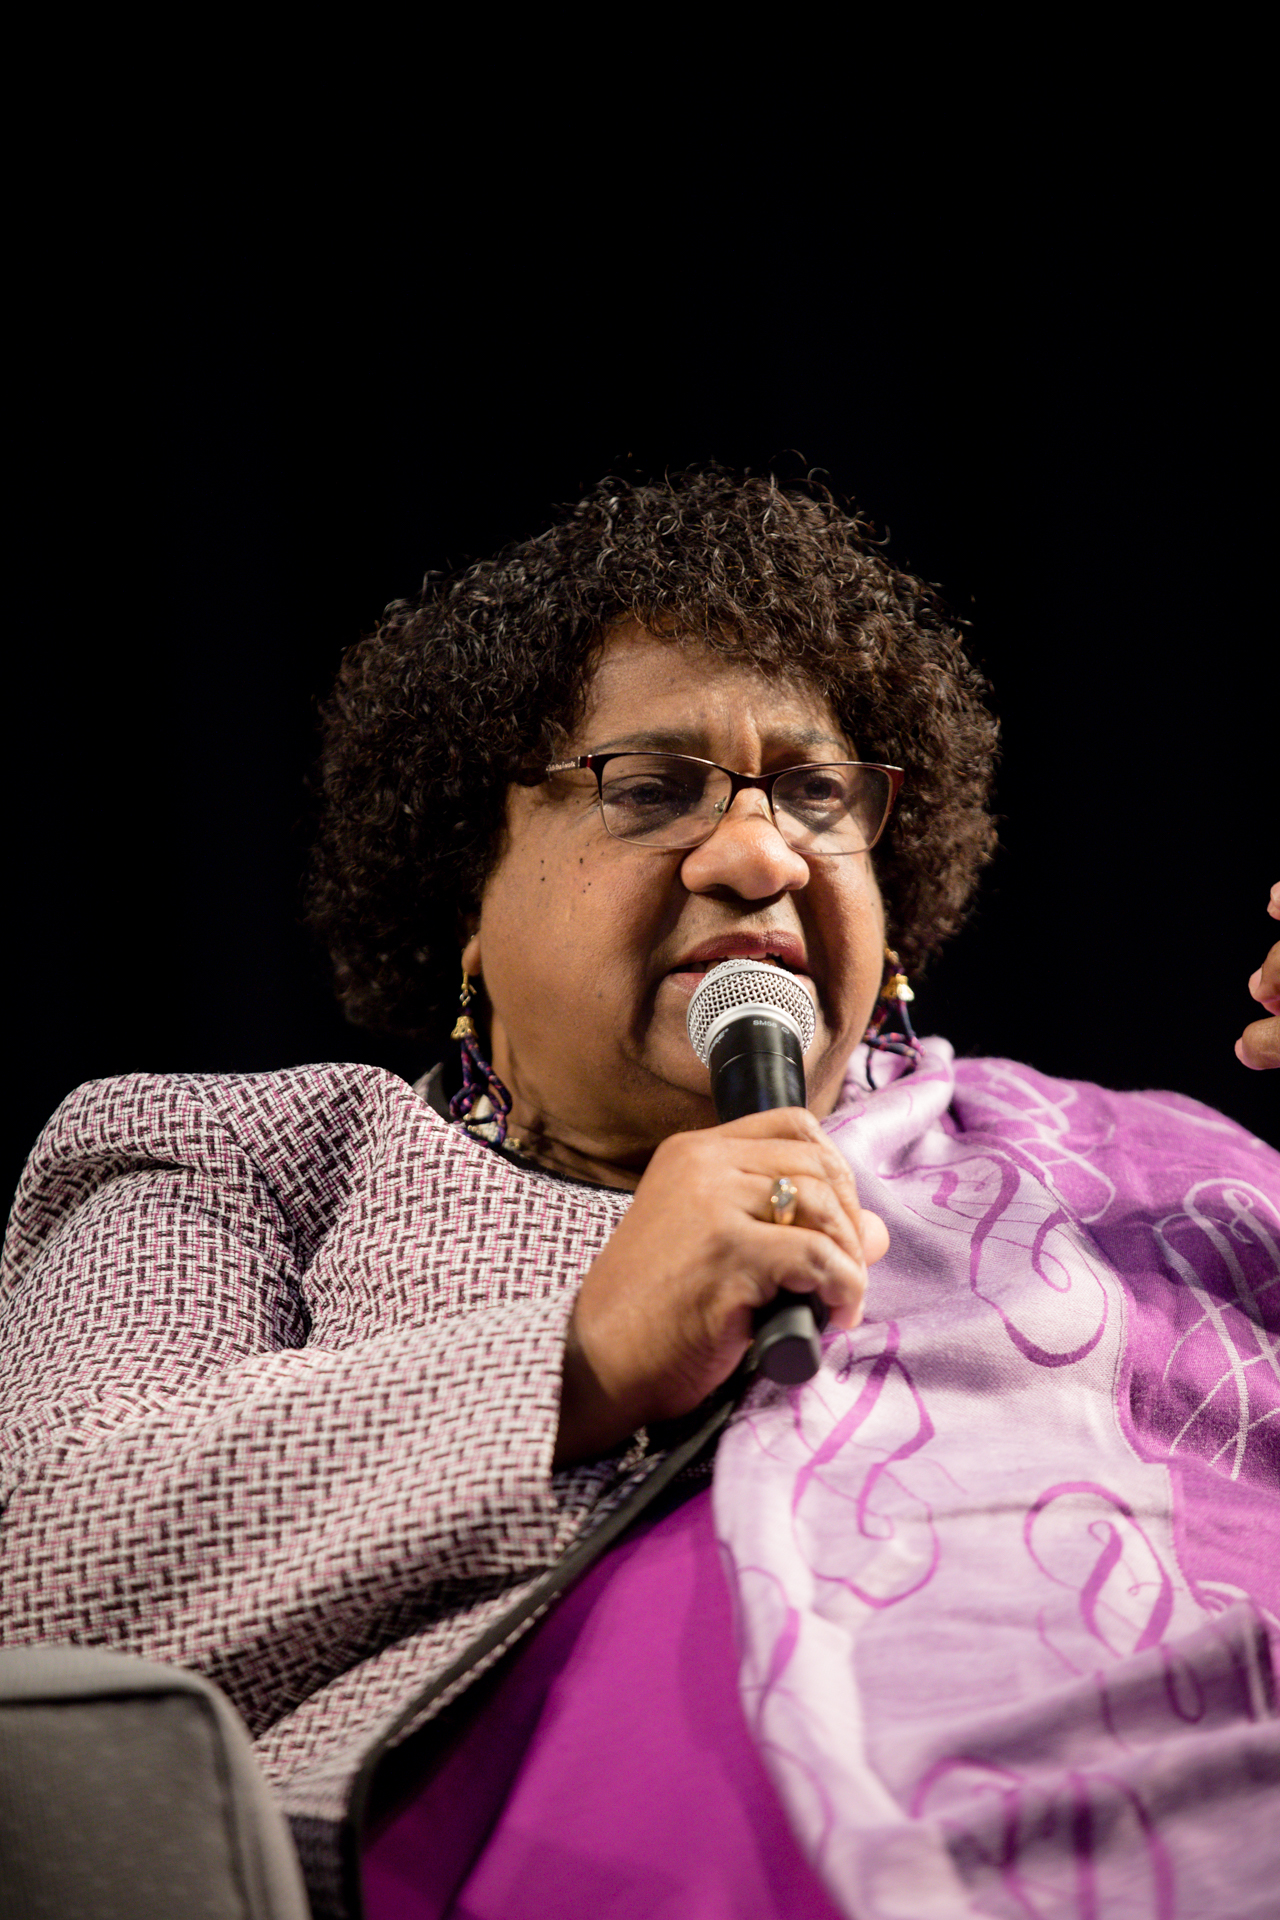 California Secretary of State Shirley Weber wearing a purple outfit and holding a microphone during a speech.